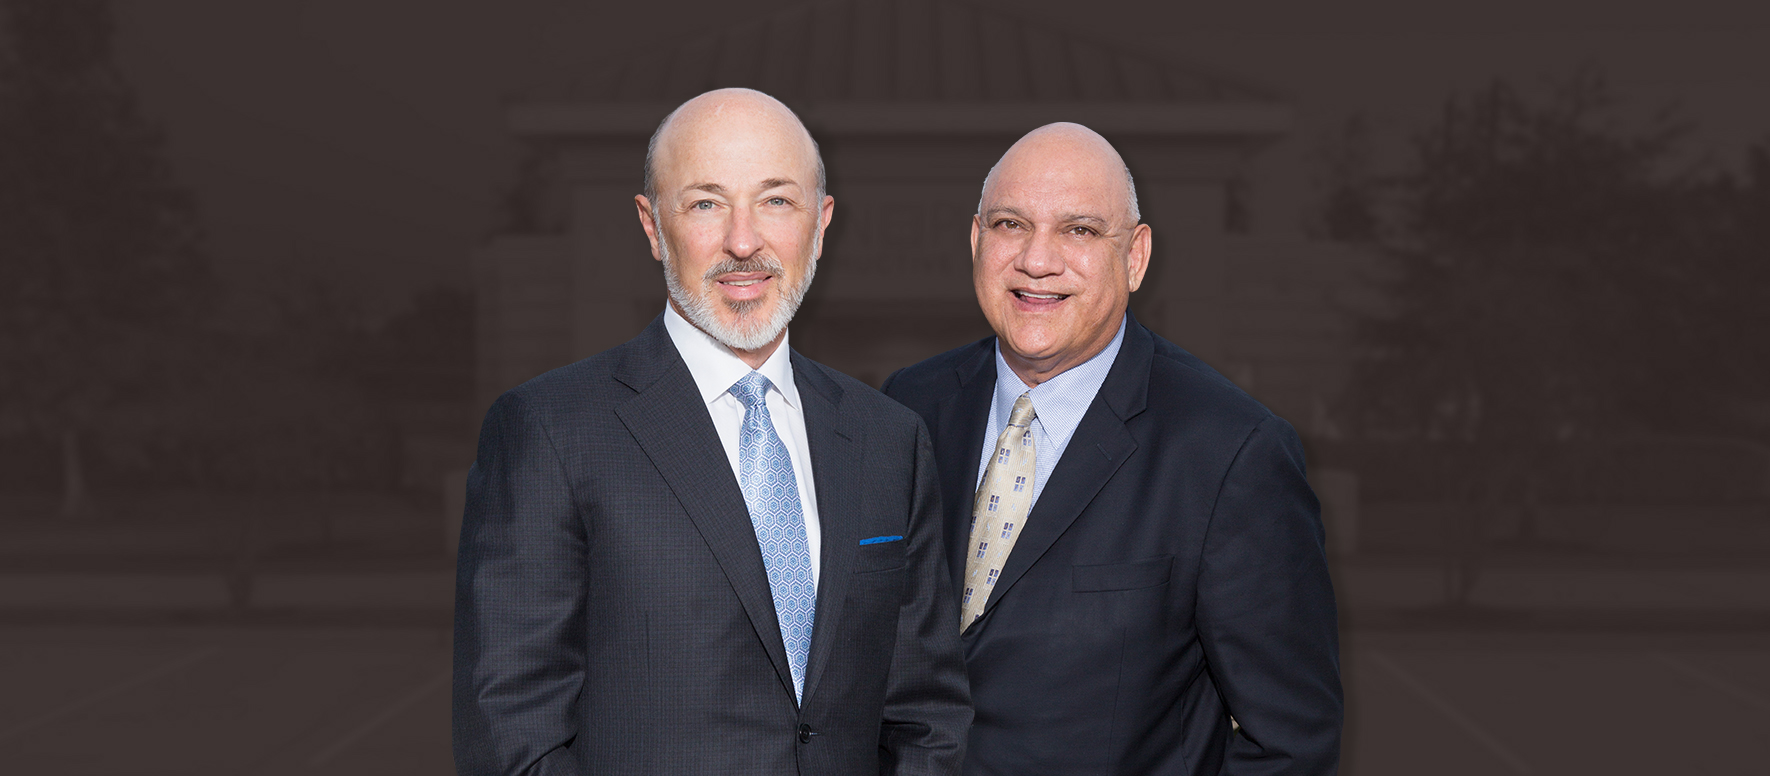 About Dr. Clayton Moliver and Dr. Fred Aguilar